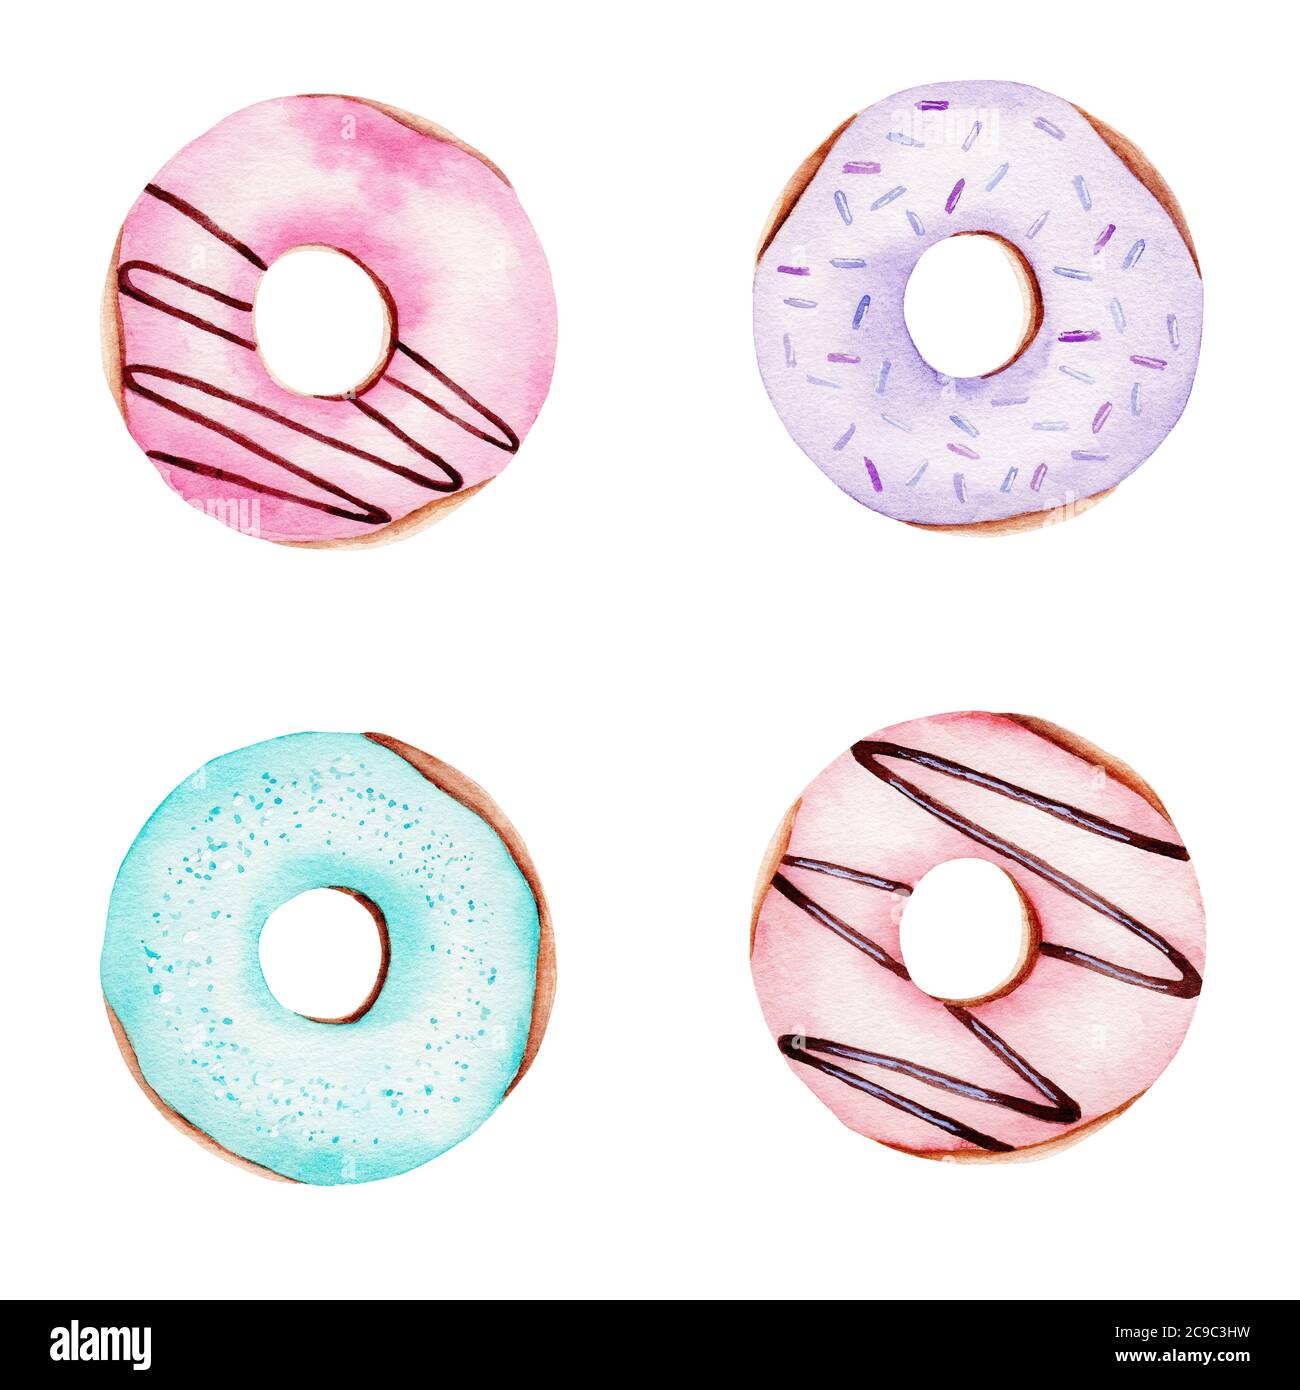 Donuts hand drawn watercolor clipart isolated in white. Sweet dessert food illustration set. Stock Photo